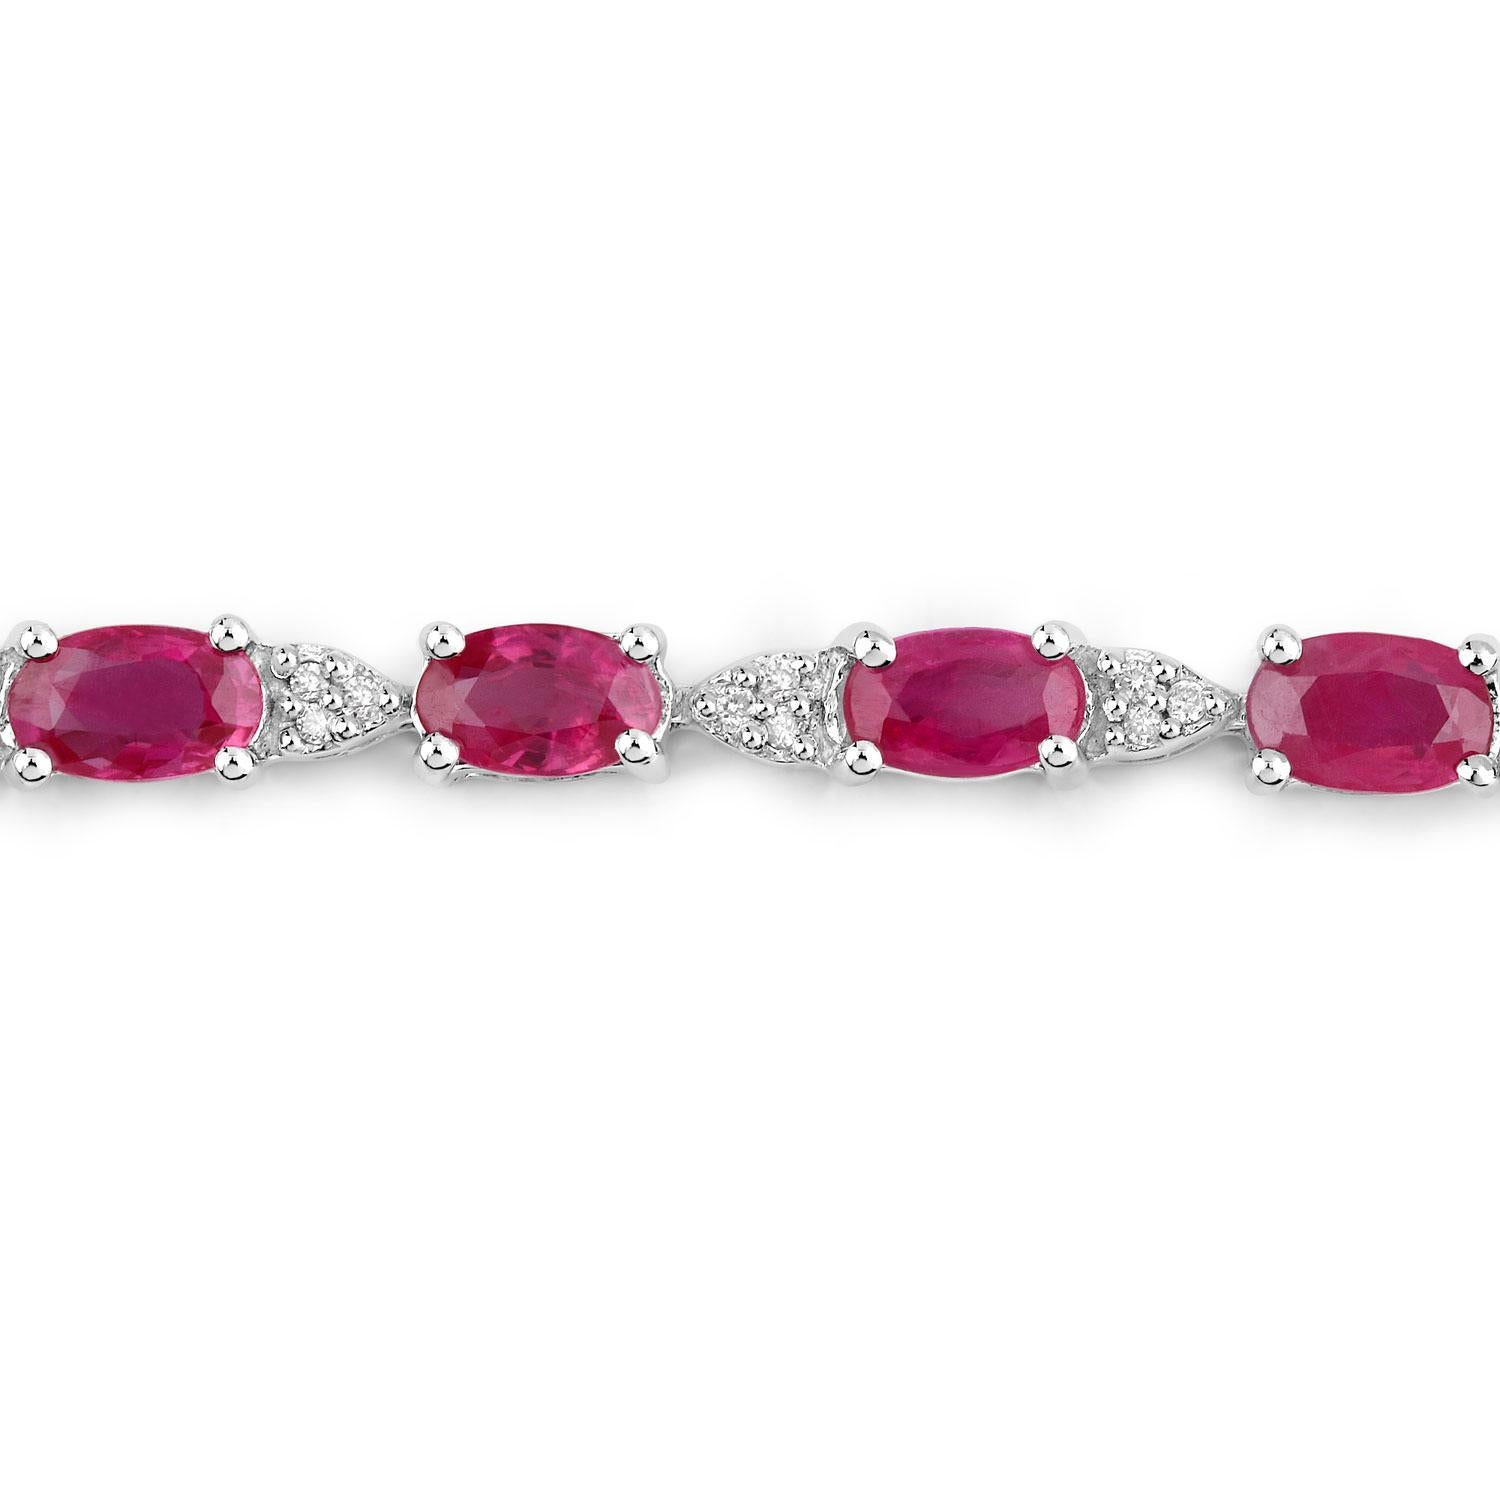 Oval Cut Natural Ruby and Diamond Tennis Bracelet 6.15 Carats Total 14k White Gold For Sale